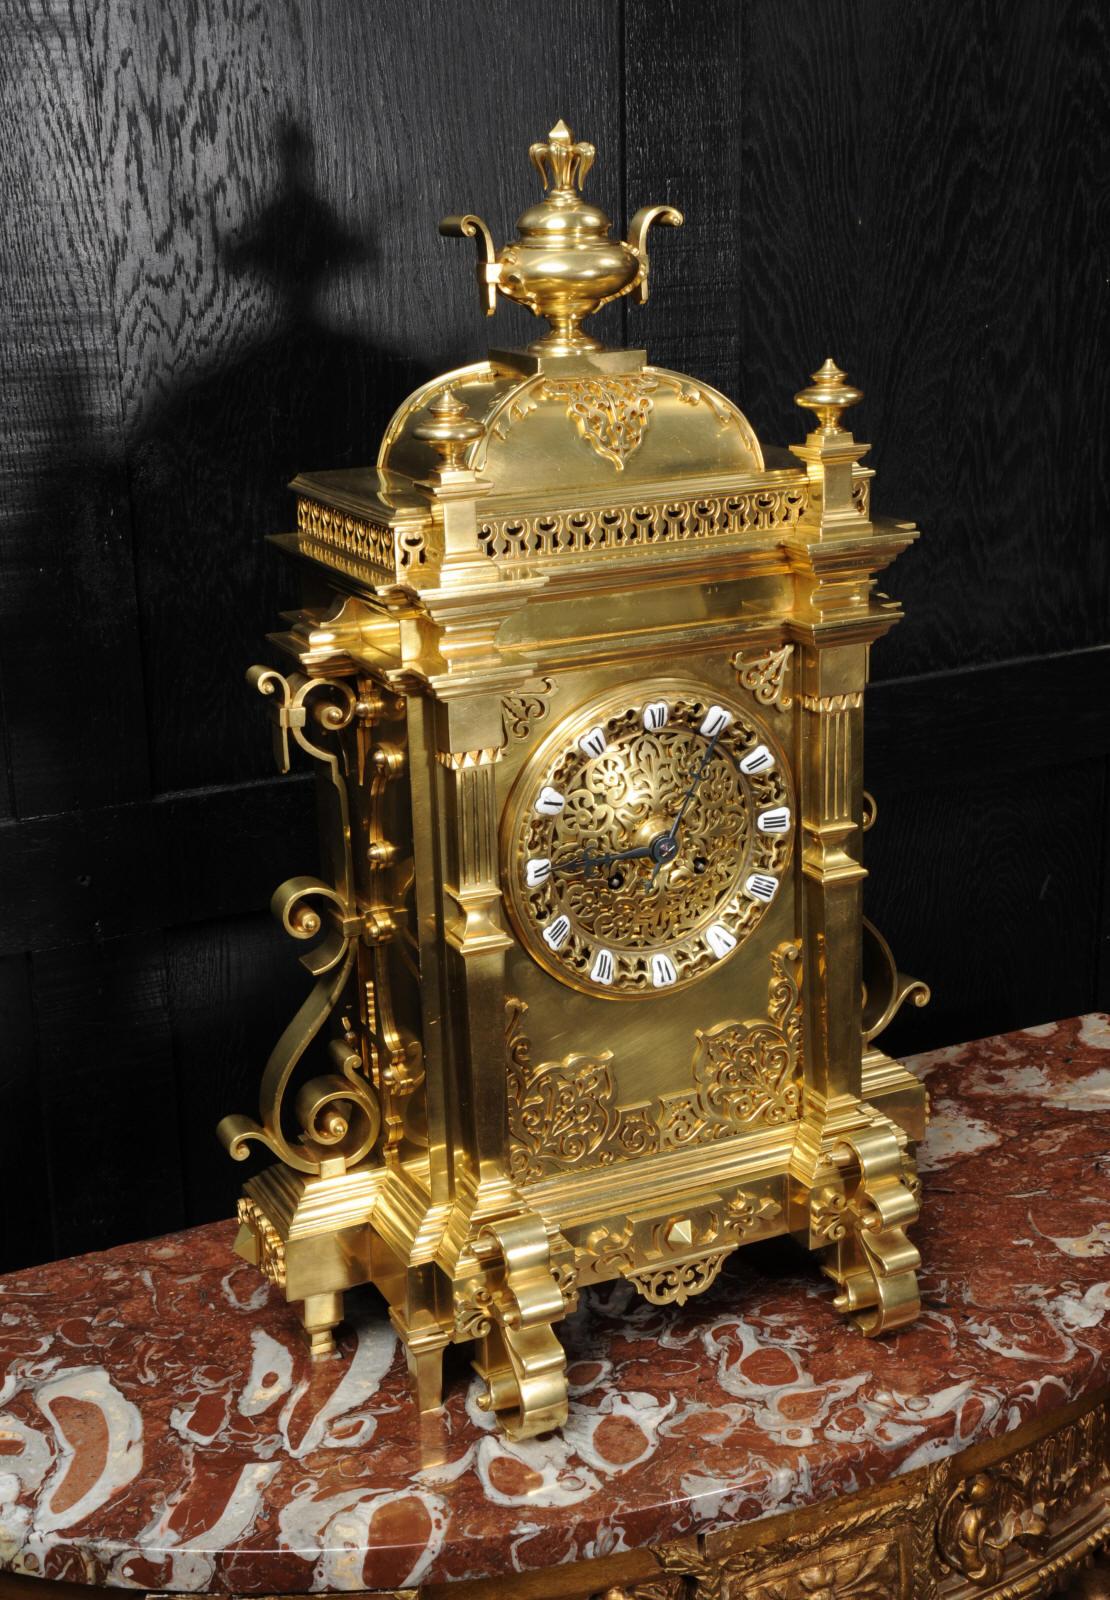 A very large antique French clock in the Gothic style. It is of exquisite quality in gilt bronze, architectural in design with a domed top, blind fret work decoration and scrolling brackets to the sides. The detail is beautifully finished and well